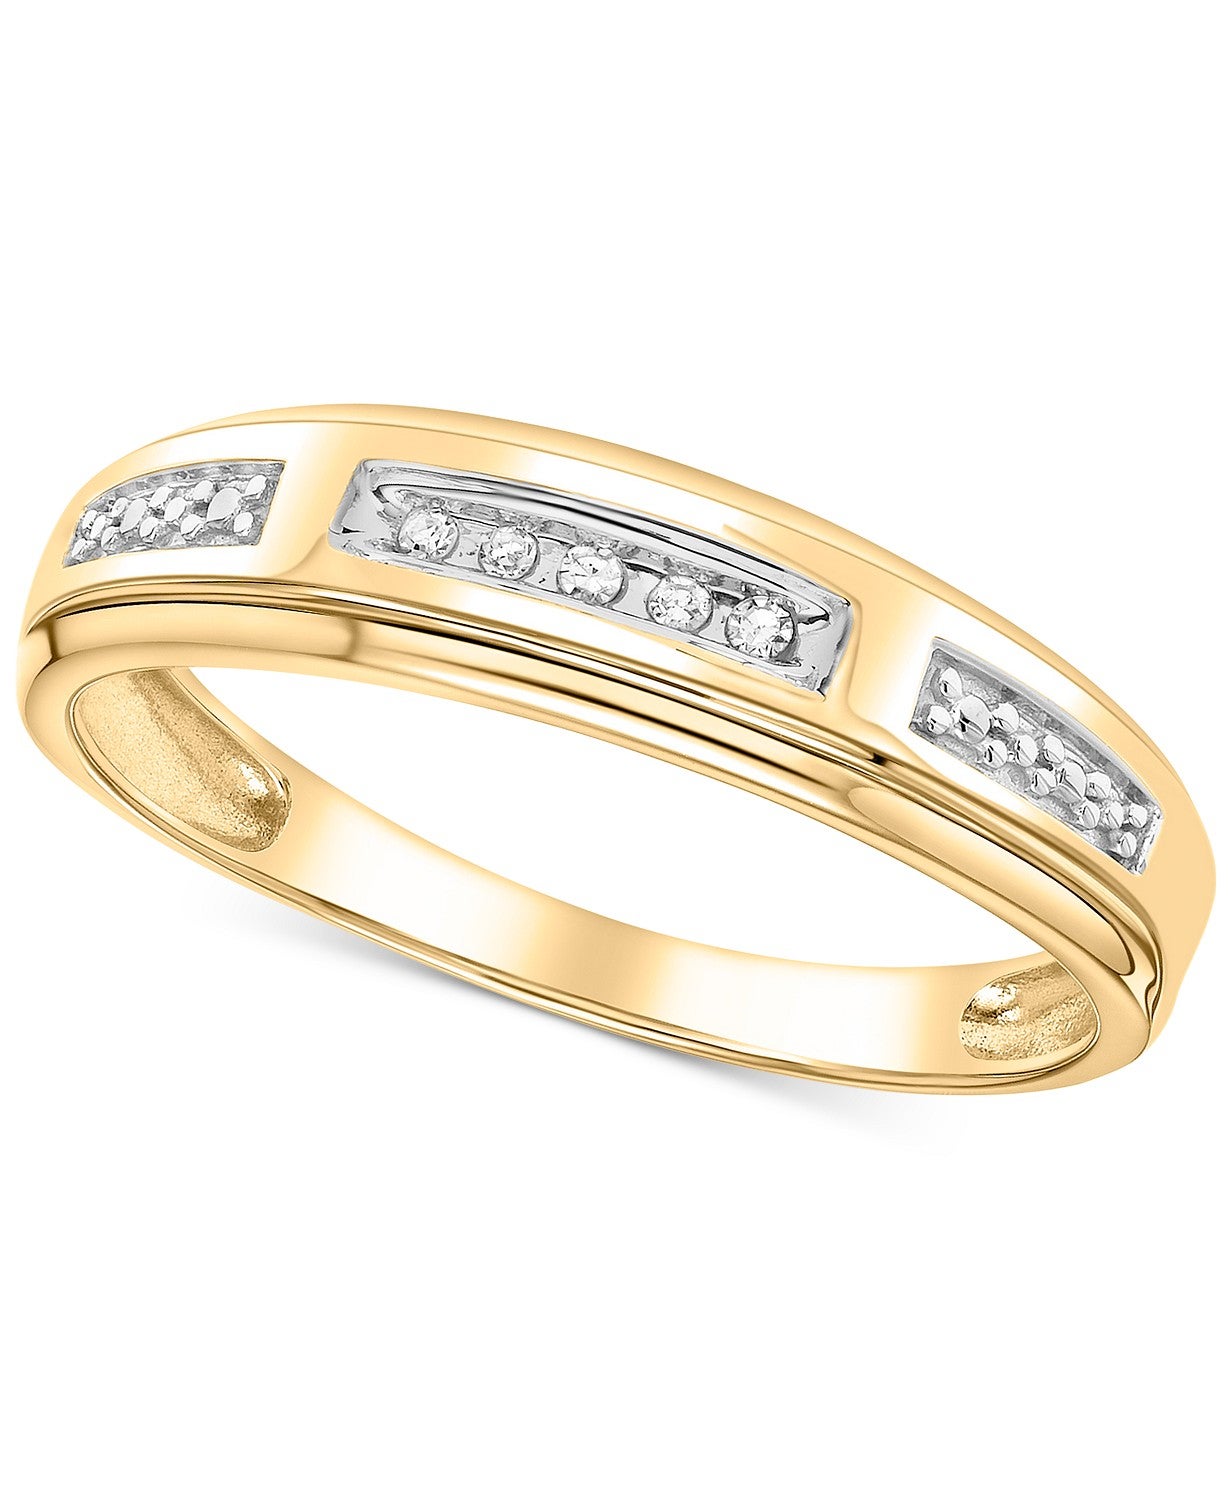 Macy's Men's Diamond Accent Wedding Band in 14k White Gold or Yellow Gold